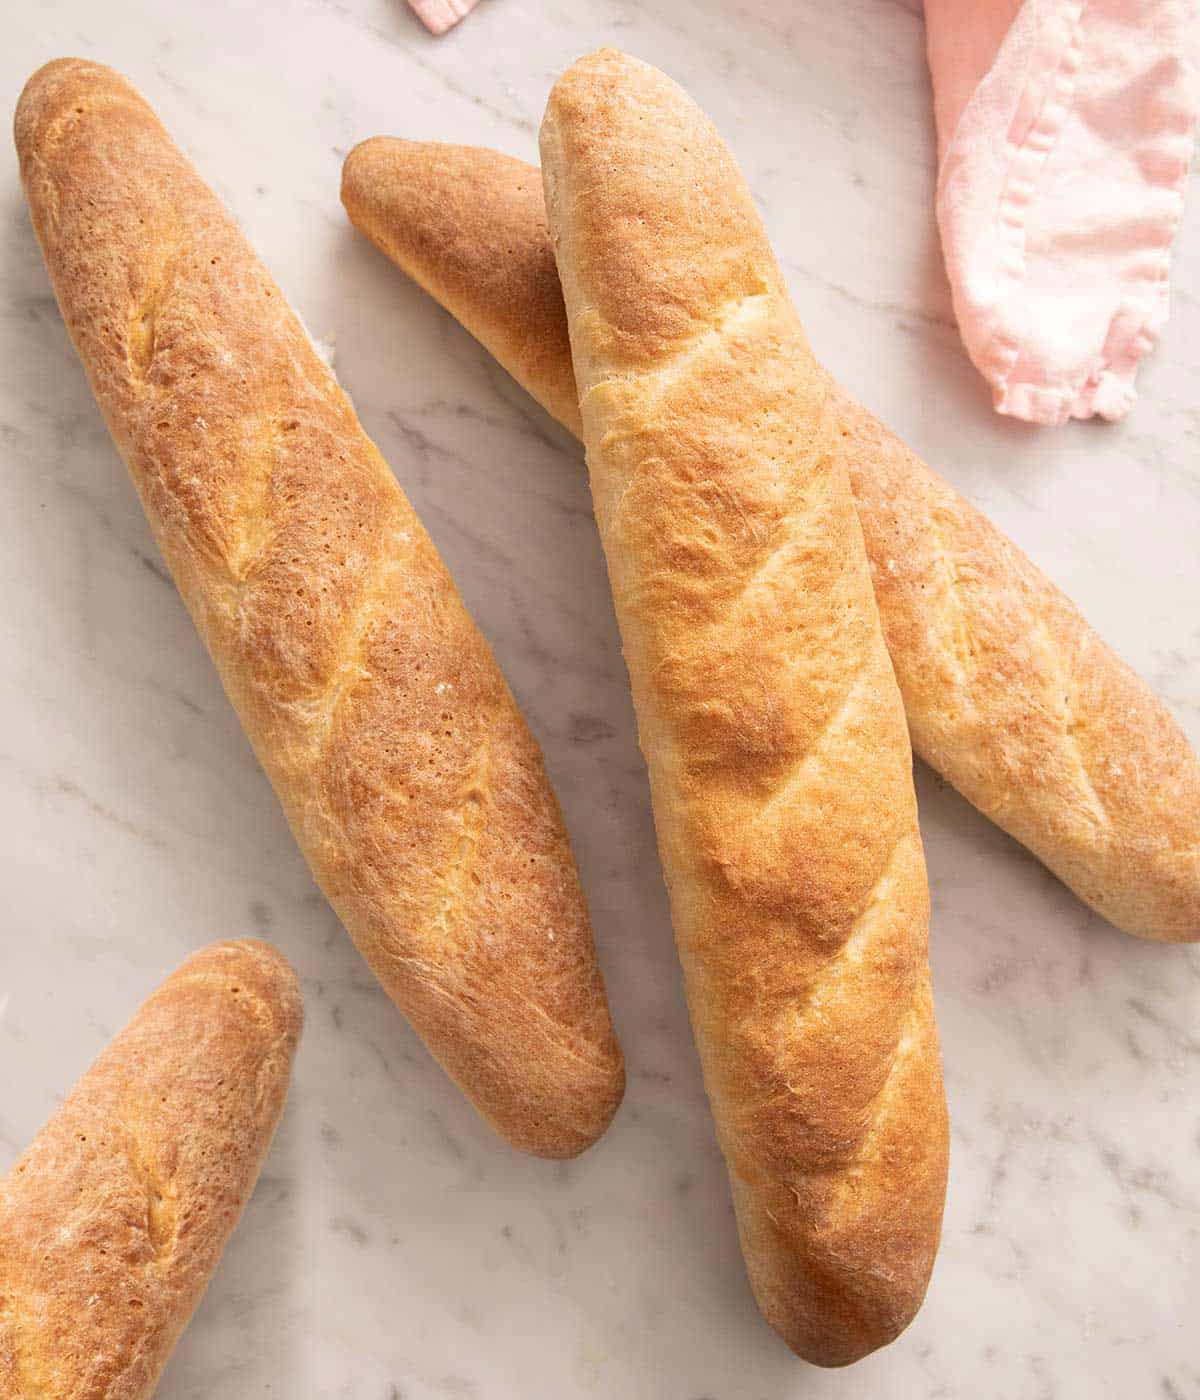 An overhead shot of French bread sticks on a marble surface